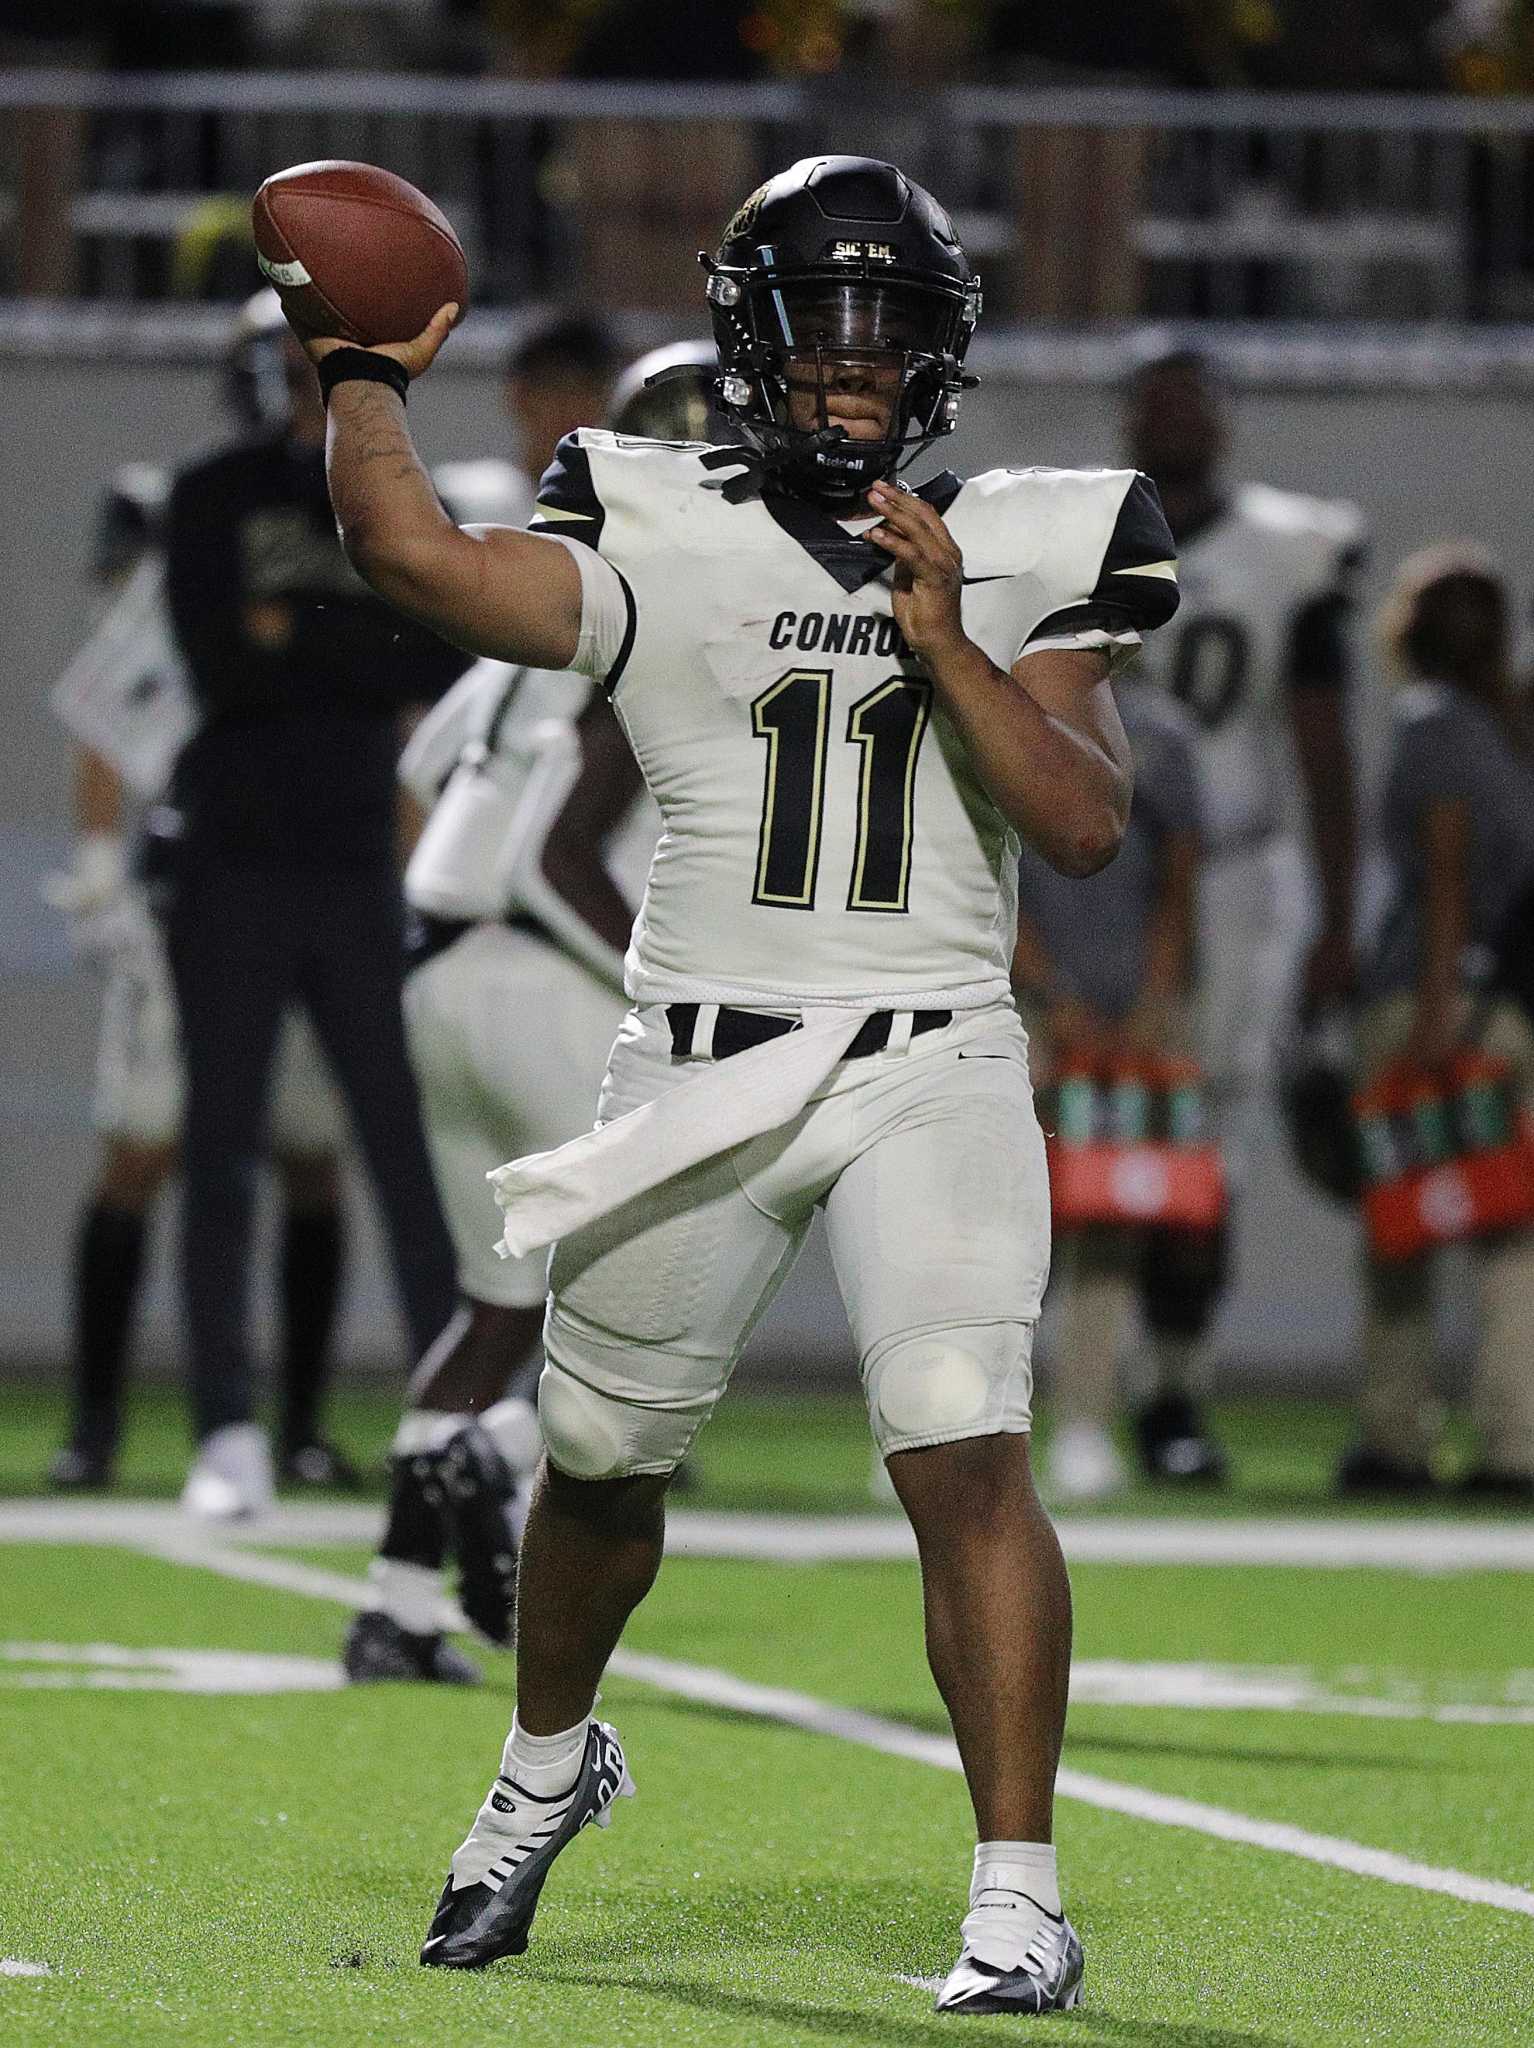 Conroe has productive night on offense; Lake Creek improves to 2-0